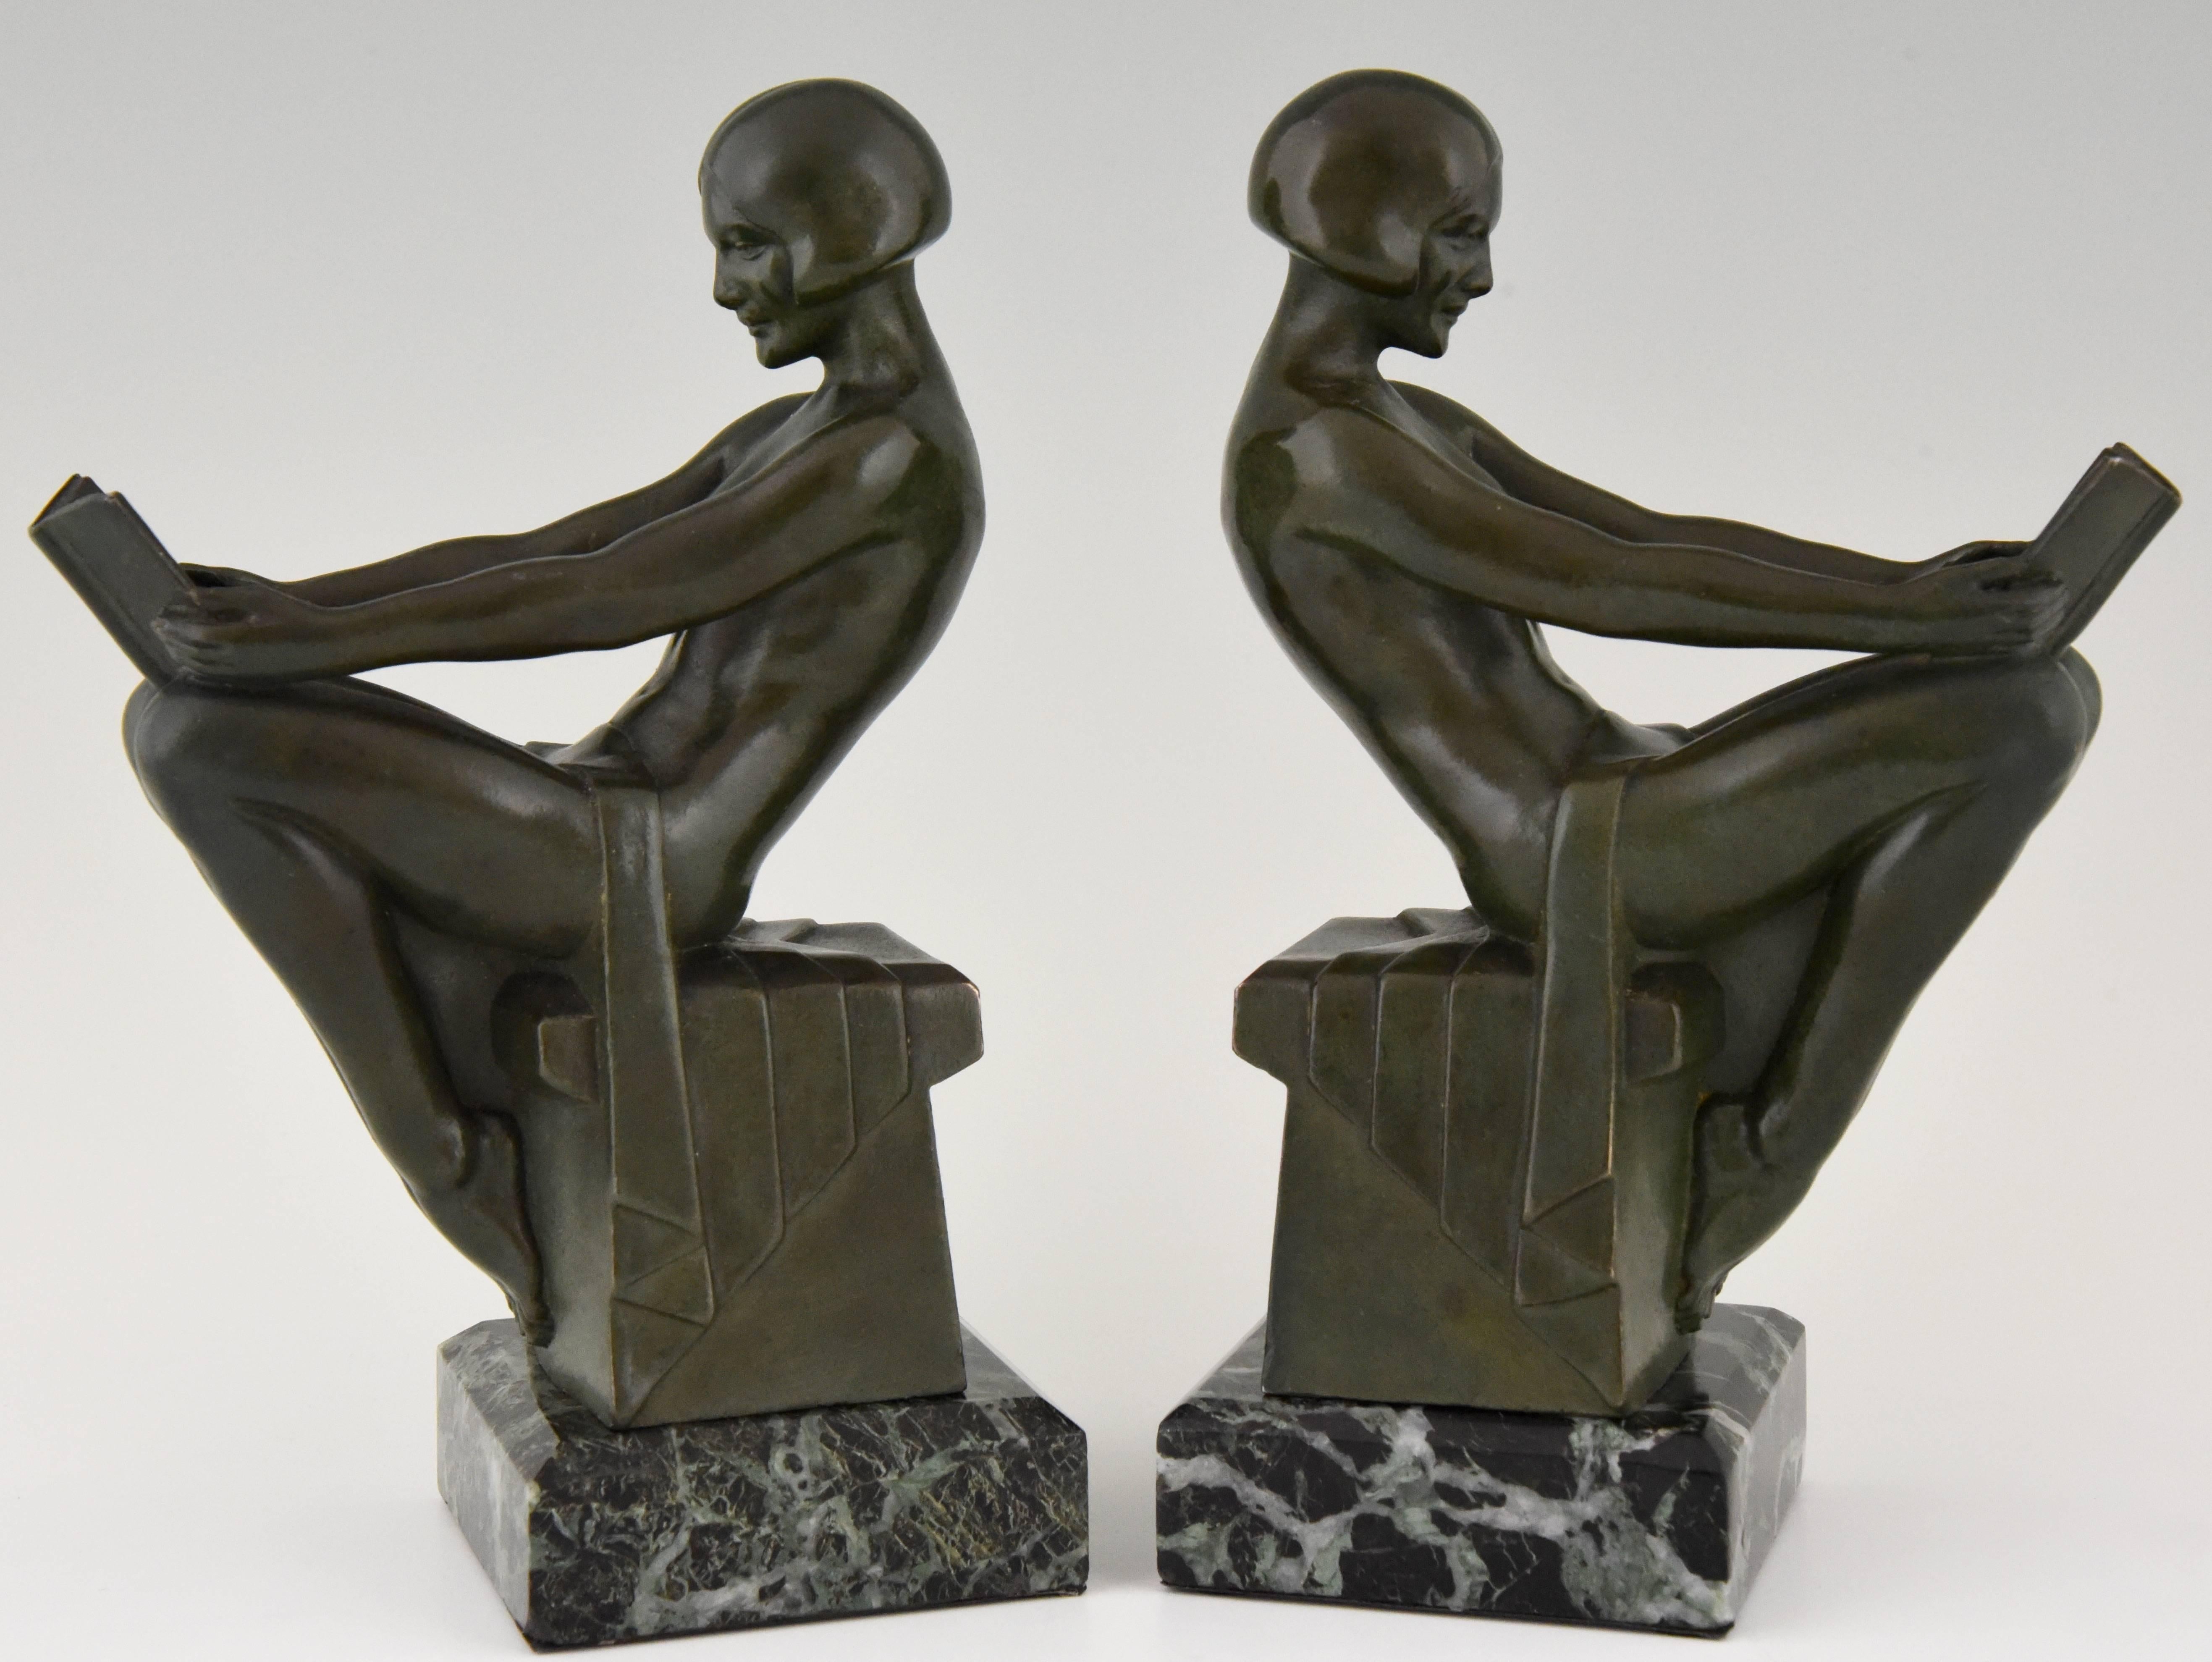 Stylish pair of Art Deco bookends with reading nudes by the famous French artist Max Le Verrier. 

Signature/ marks: M. Le Verrier.
Style: Art Deco
Date: 1930
Material: Green patinated art metal. Green marble base.
Origin: France
Size: H. 22 cm. x